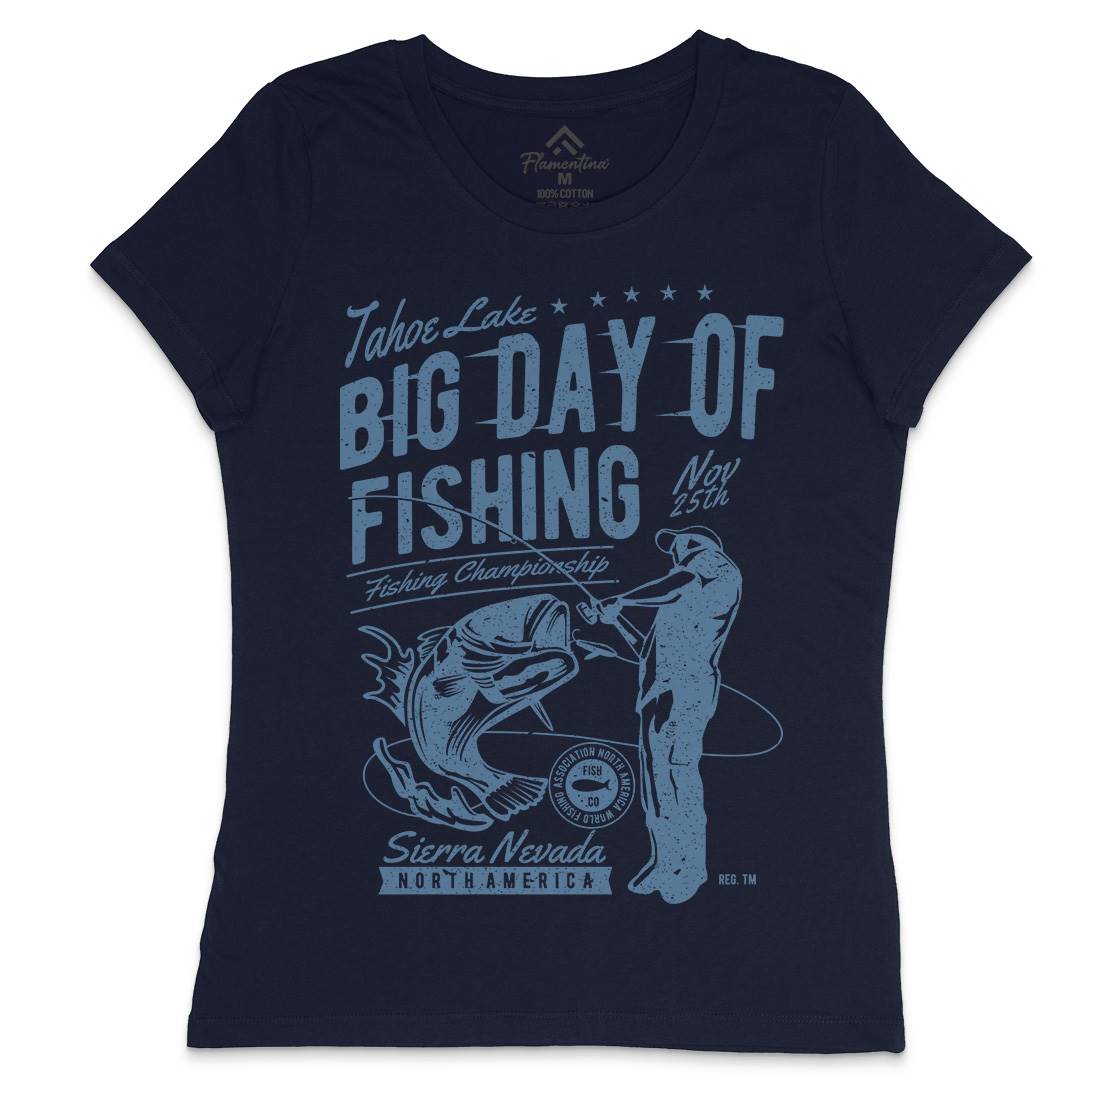 Big Day Of Womens Crew Neck T-Shirt Fishing A618